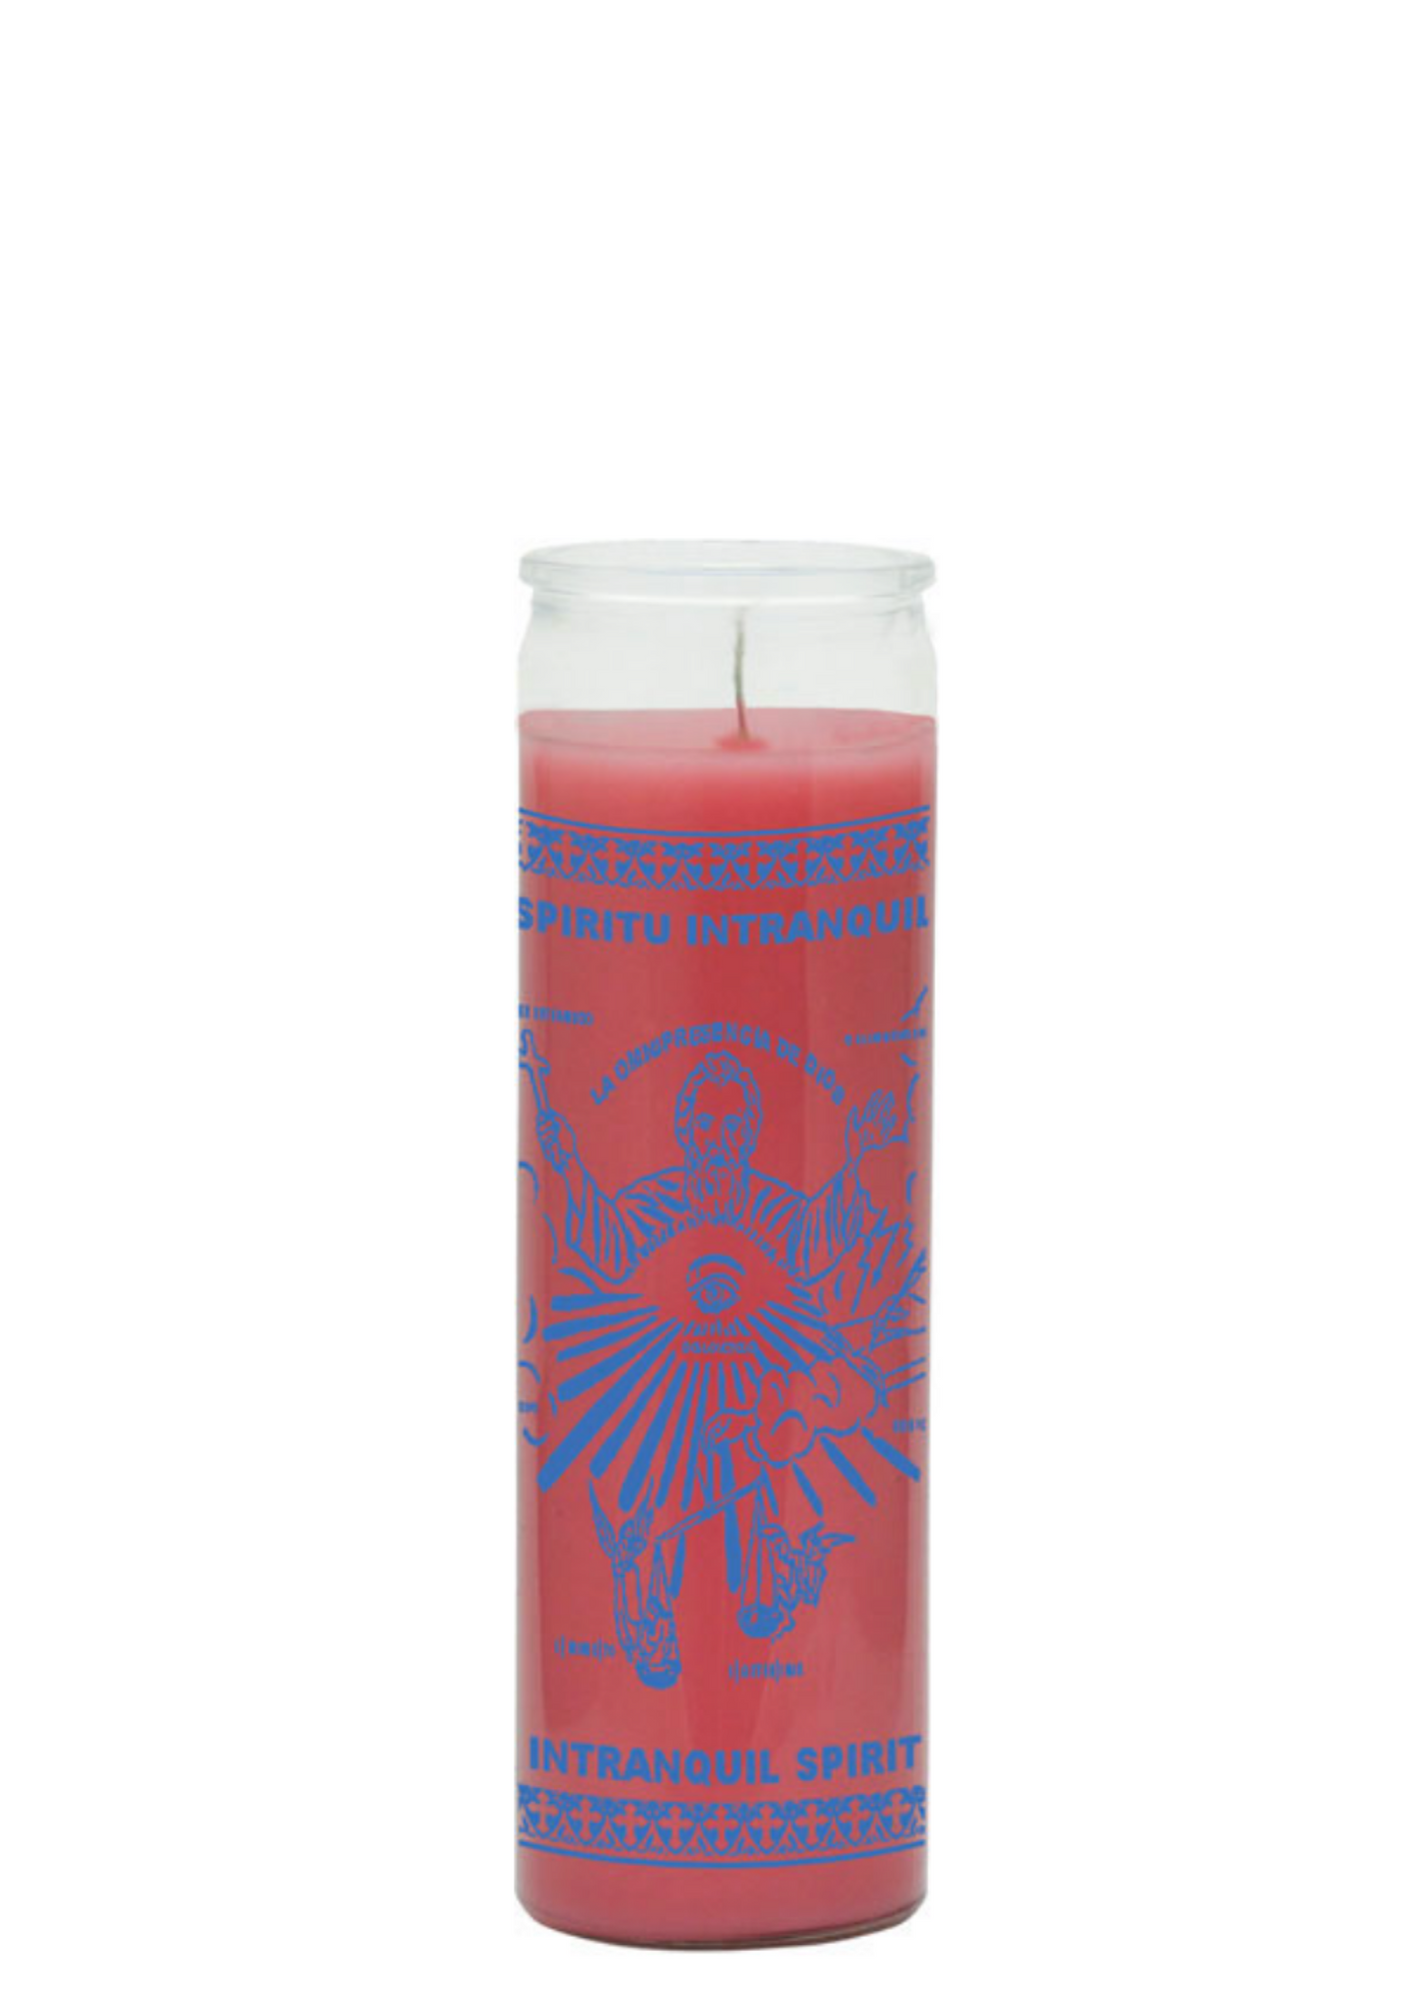 Intranquil spirit (pink) 1 color 7 day candle